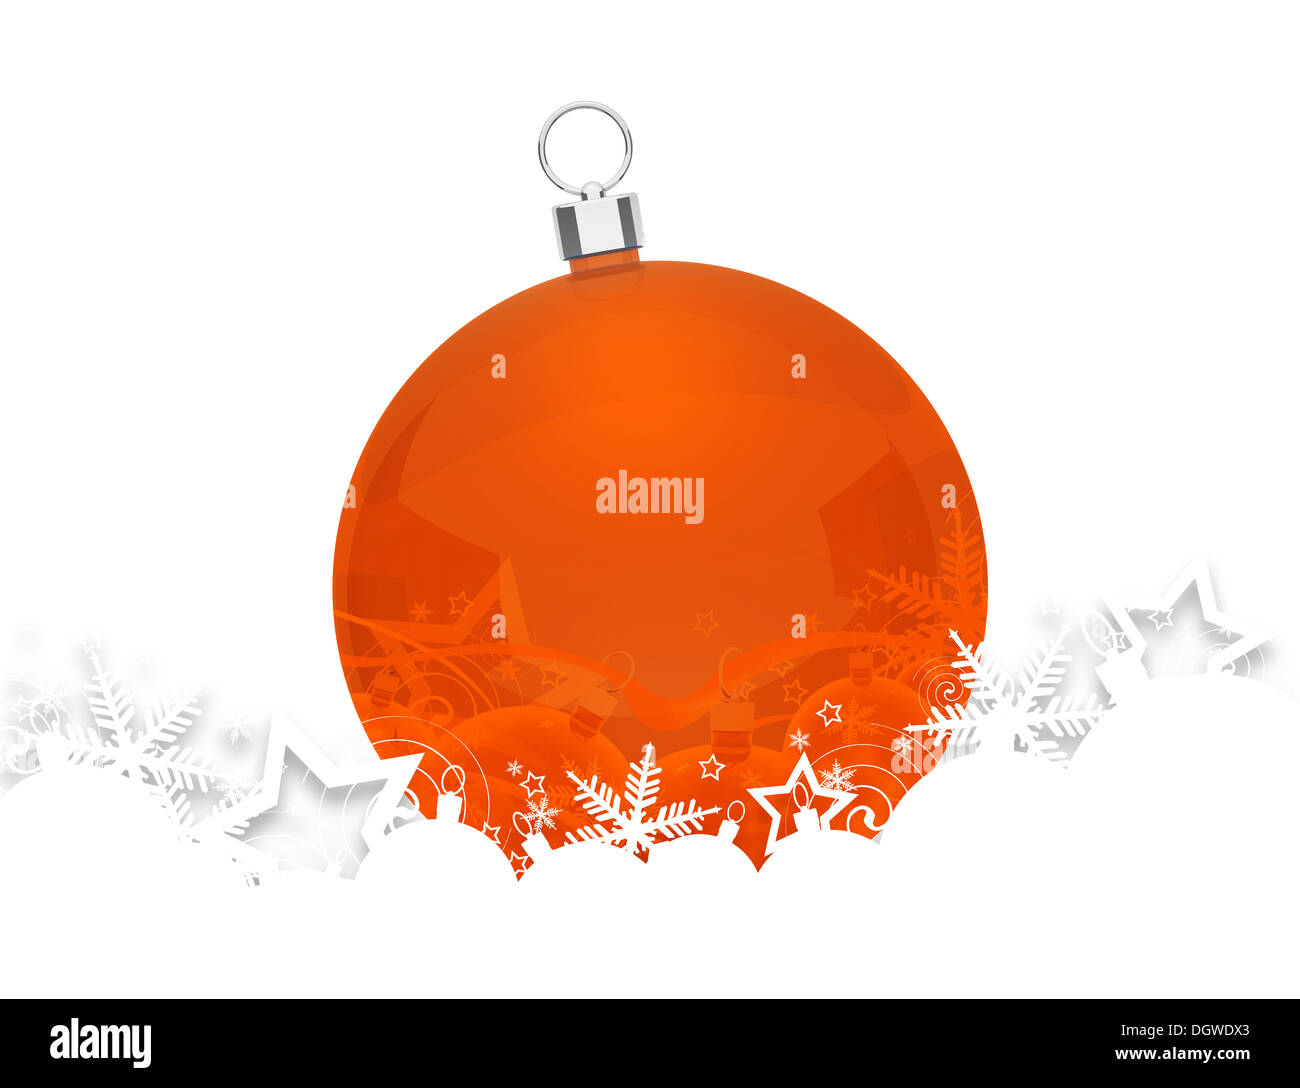 Christmas bauble for your design. Stock Photo